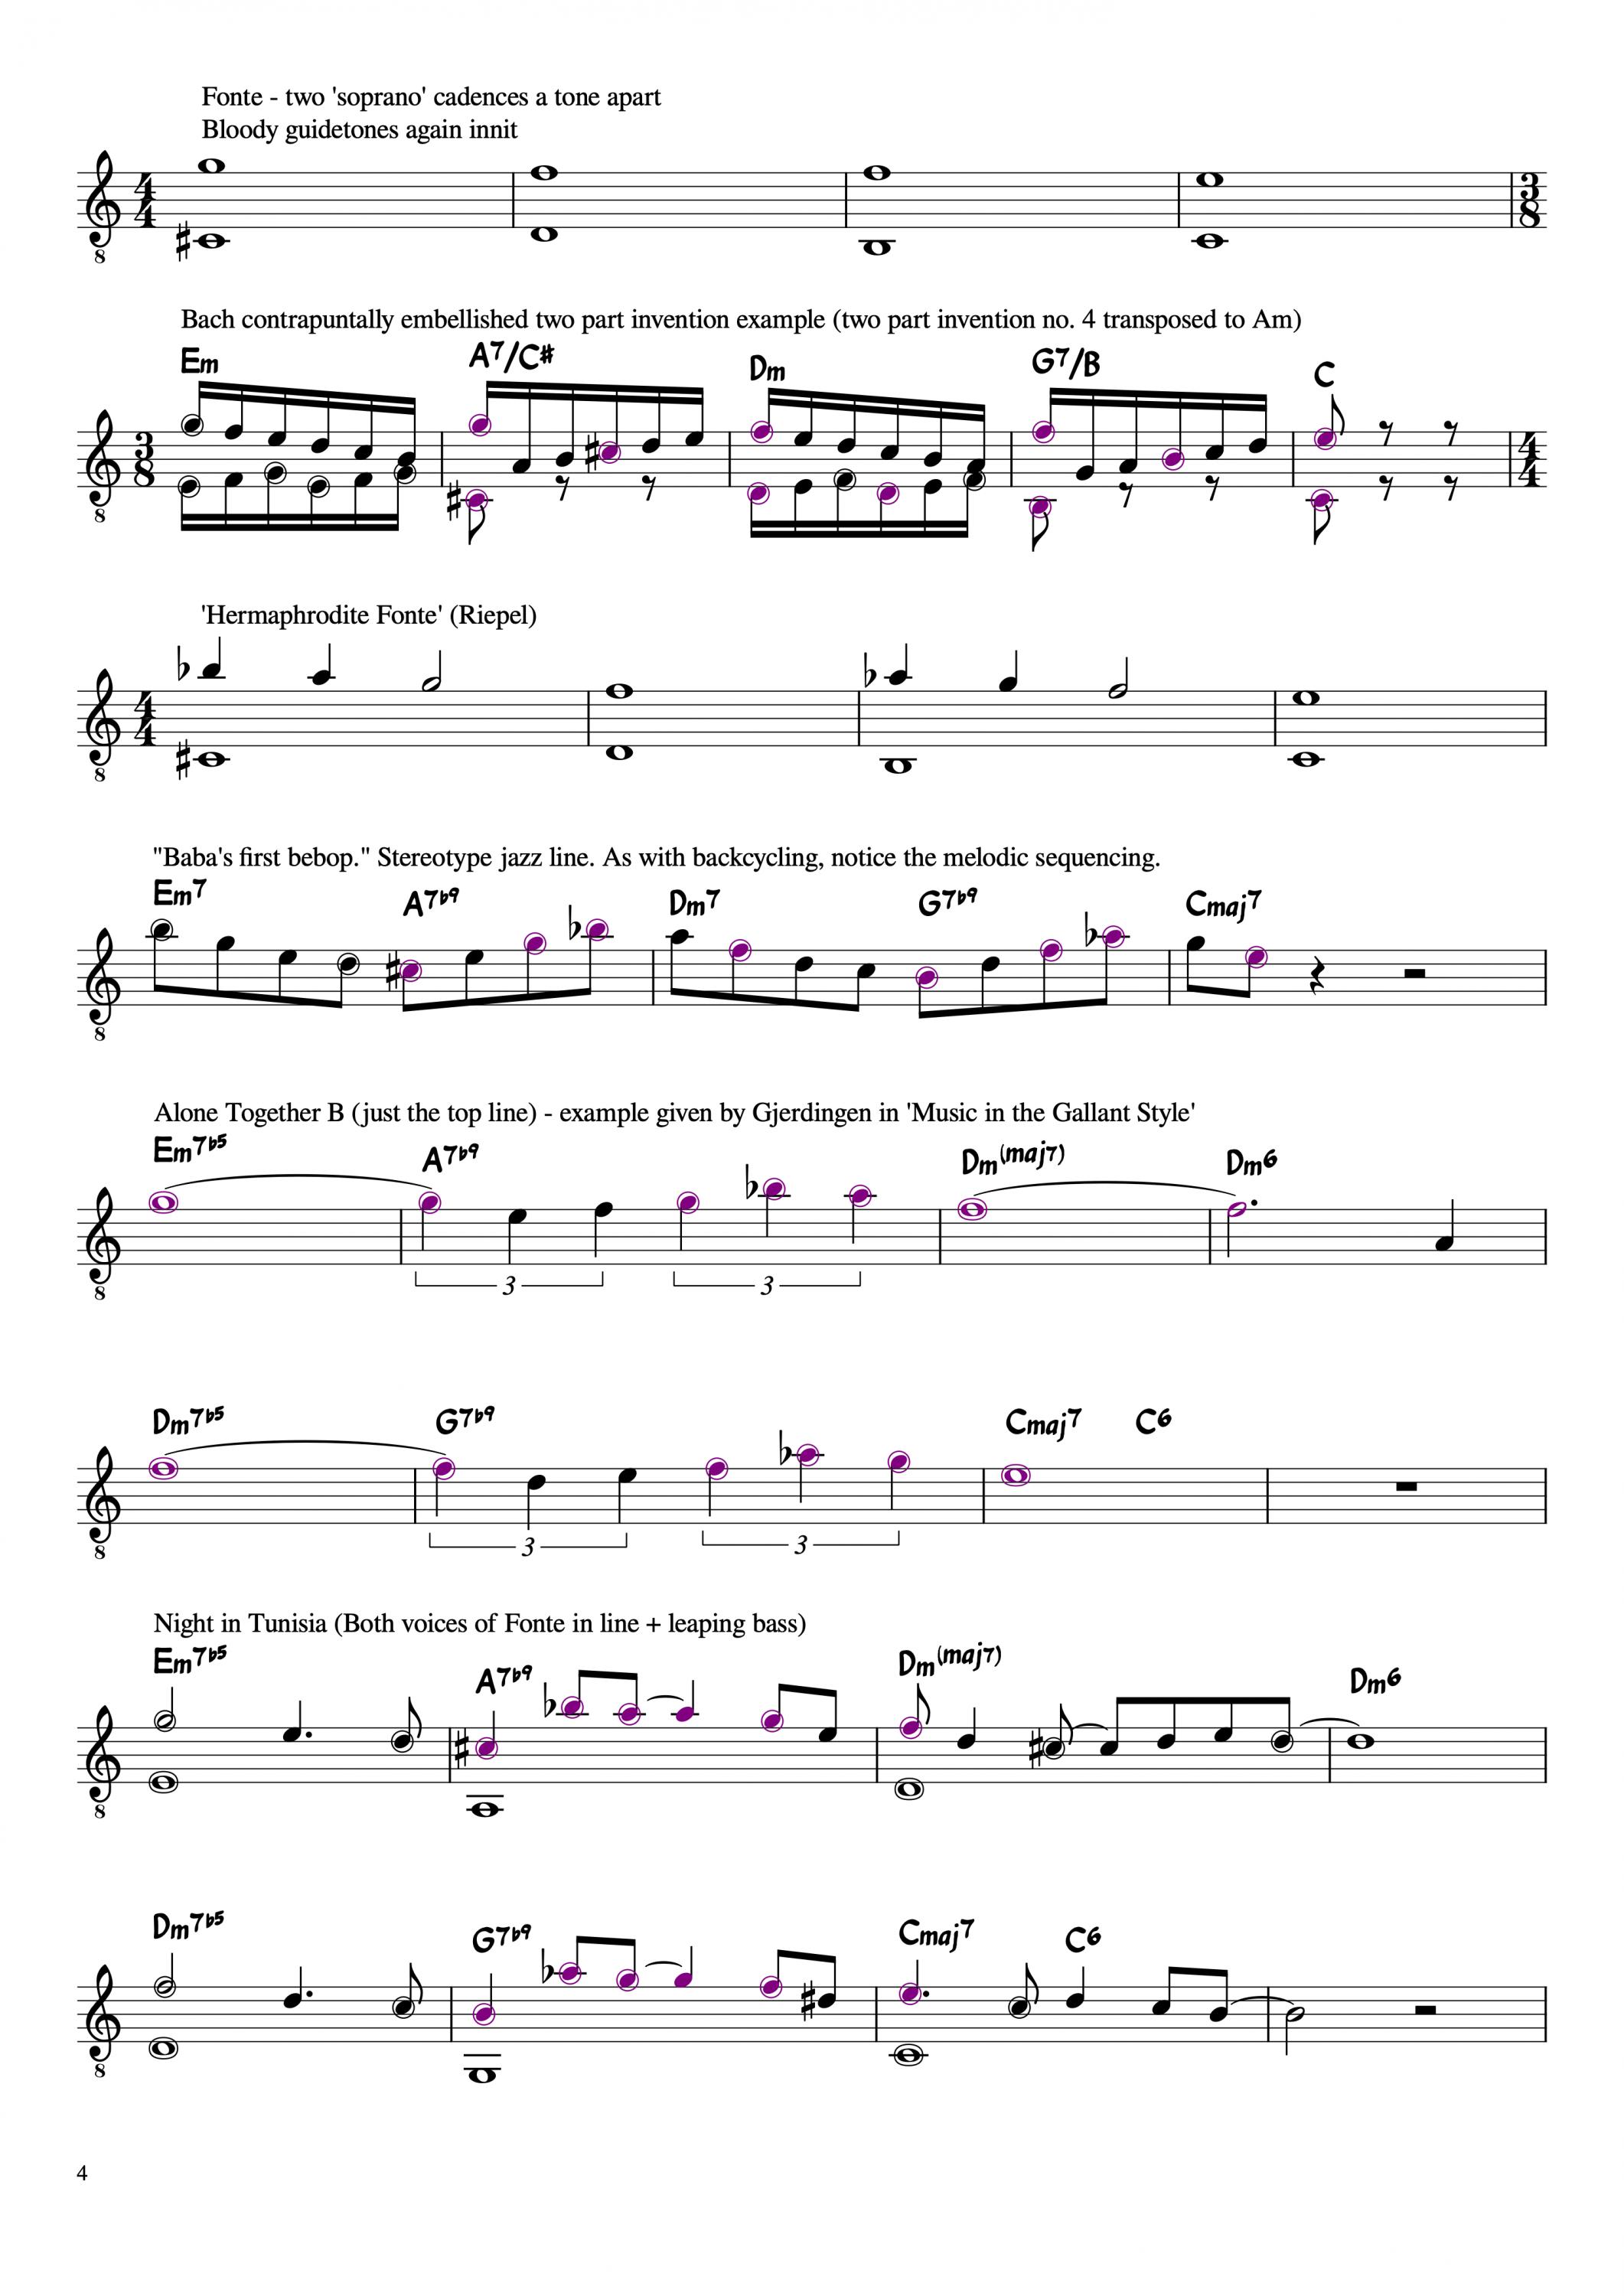 Classical schemata (counterpoint skeletons) in jazz - what I've been working on-schemata_for_jazz-png-4-jpg